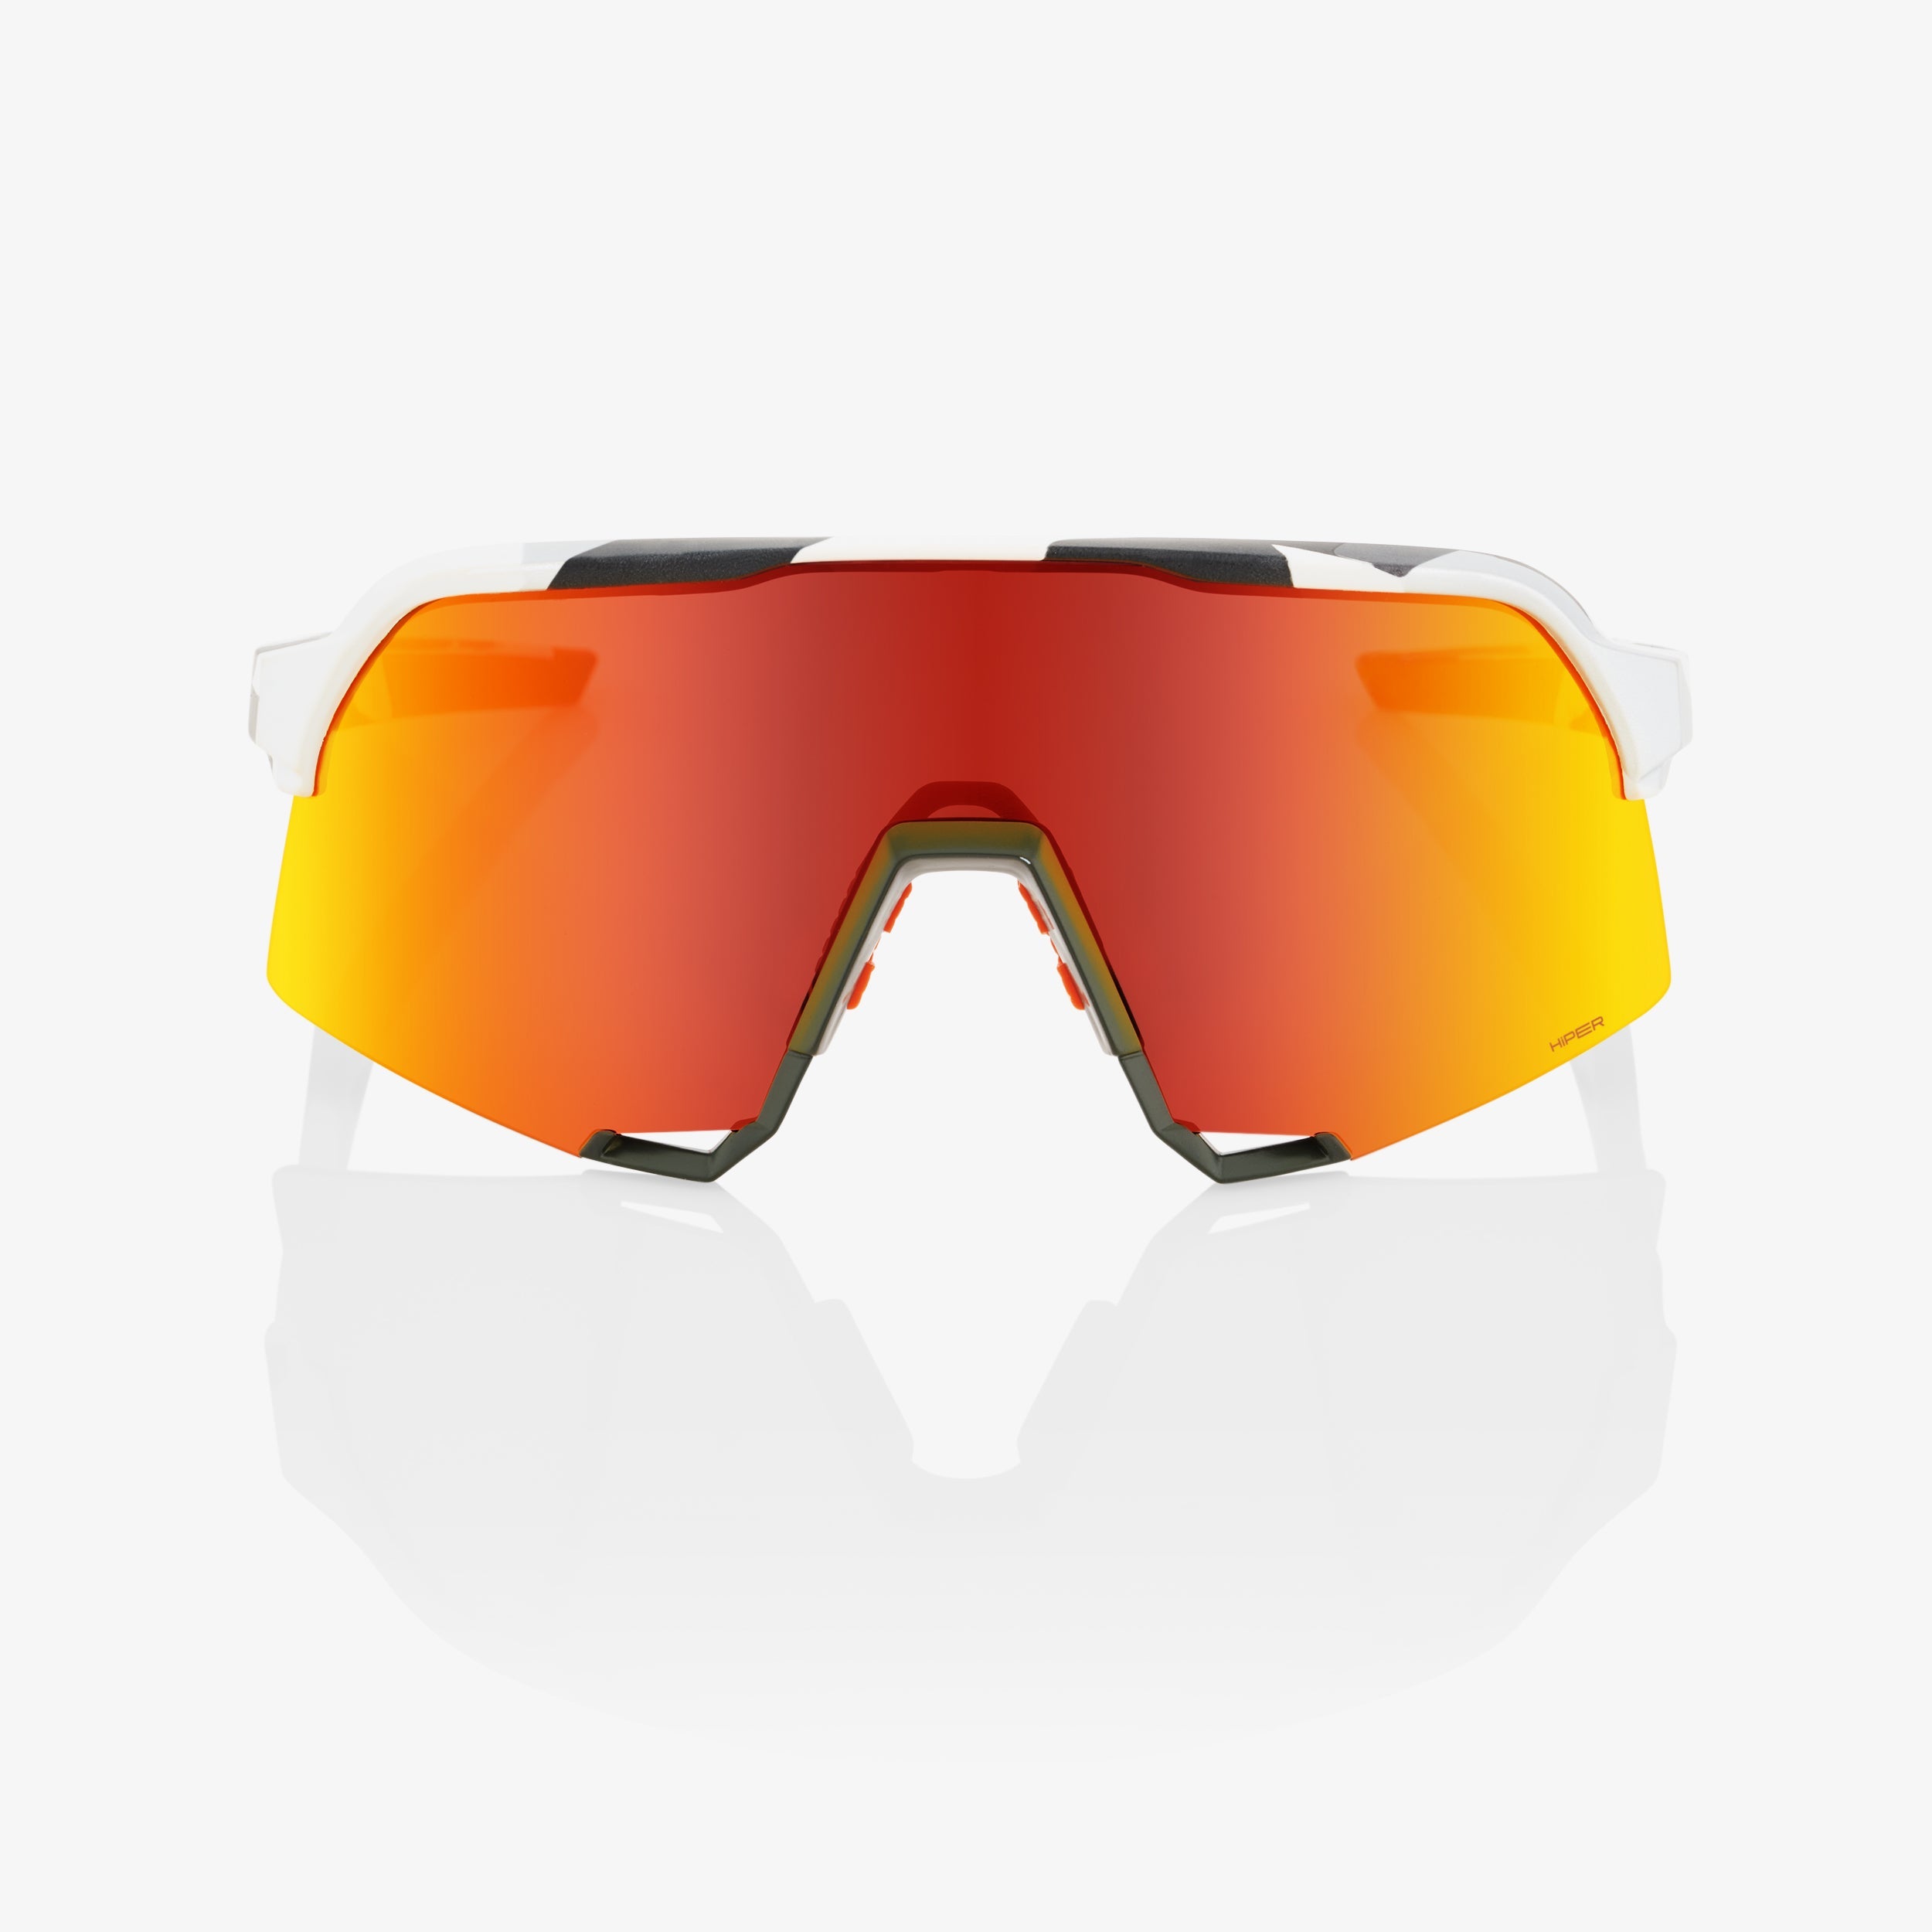 S3 - Soft Tact Grey Camo - HiPER® Red Multilayer Mirror Lens - Secondary